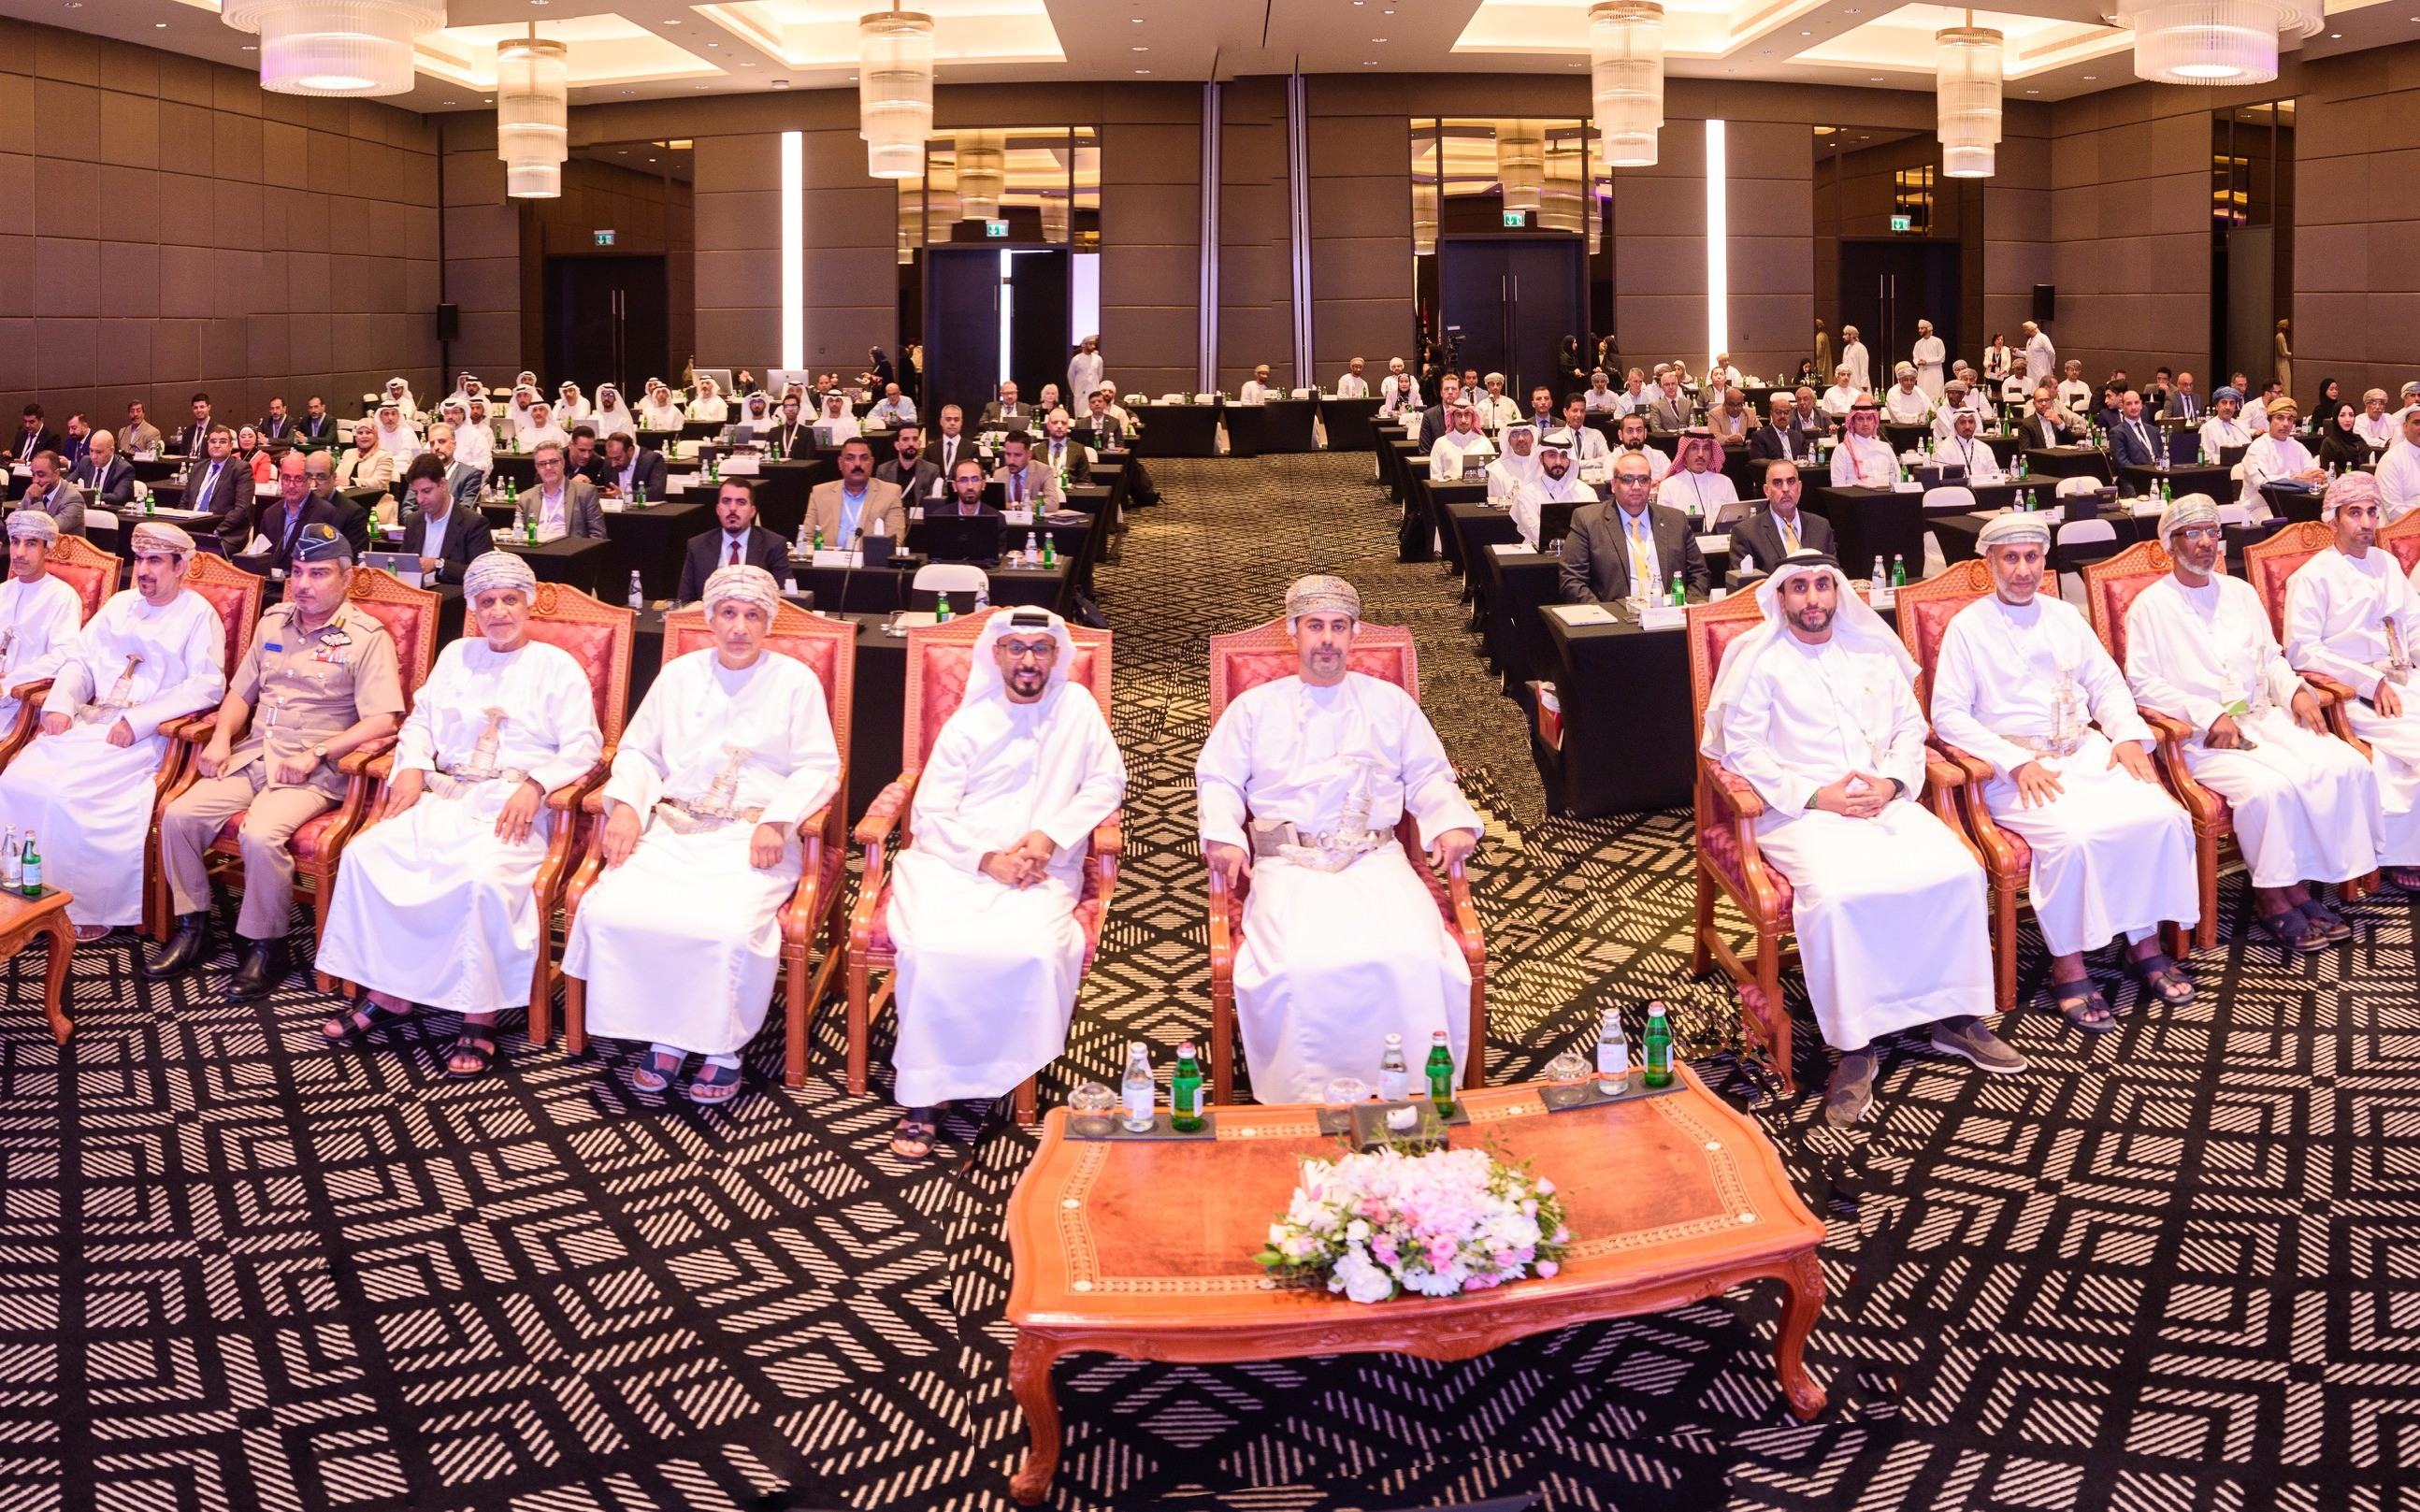 Sultanate of Oman  is Hosting International Event: 20th Regional Group Meeting for Aviation Planning and Implementation in the Middle East, Alongside 10th Regional Meeting on Aviation Safety